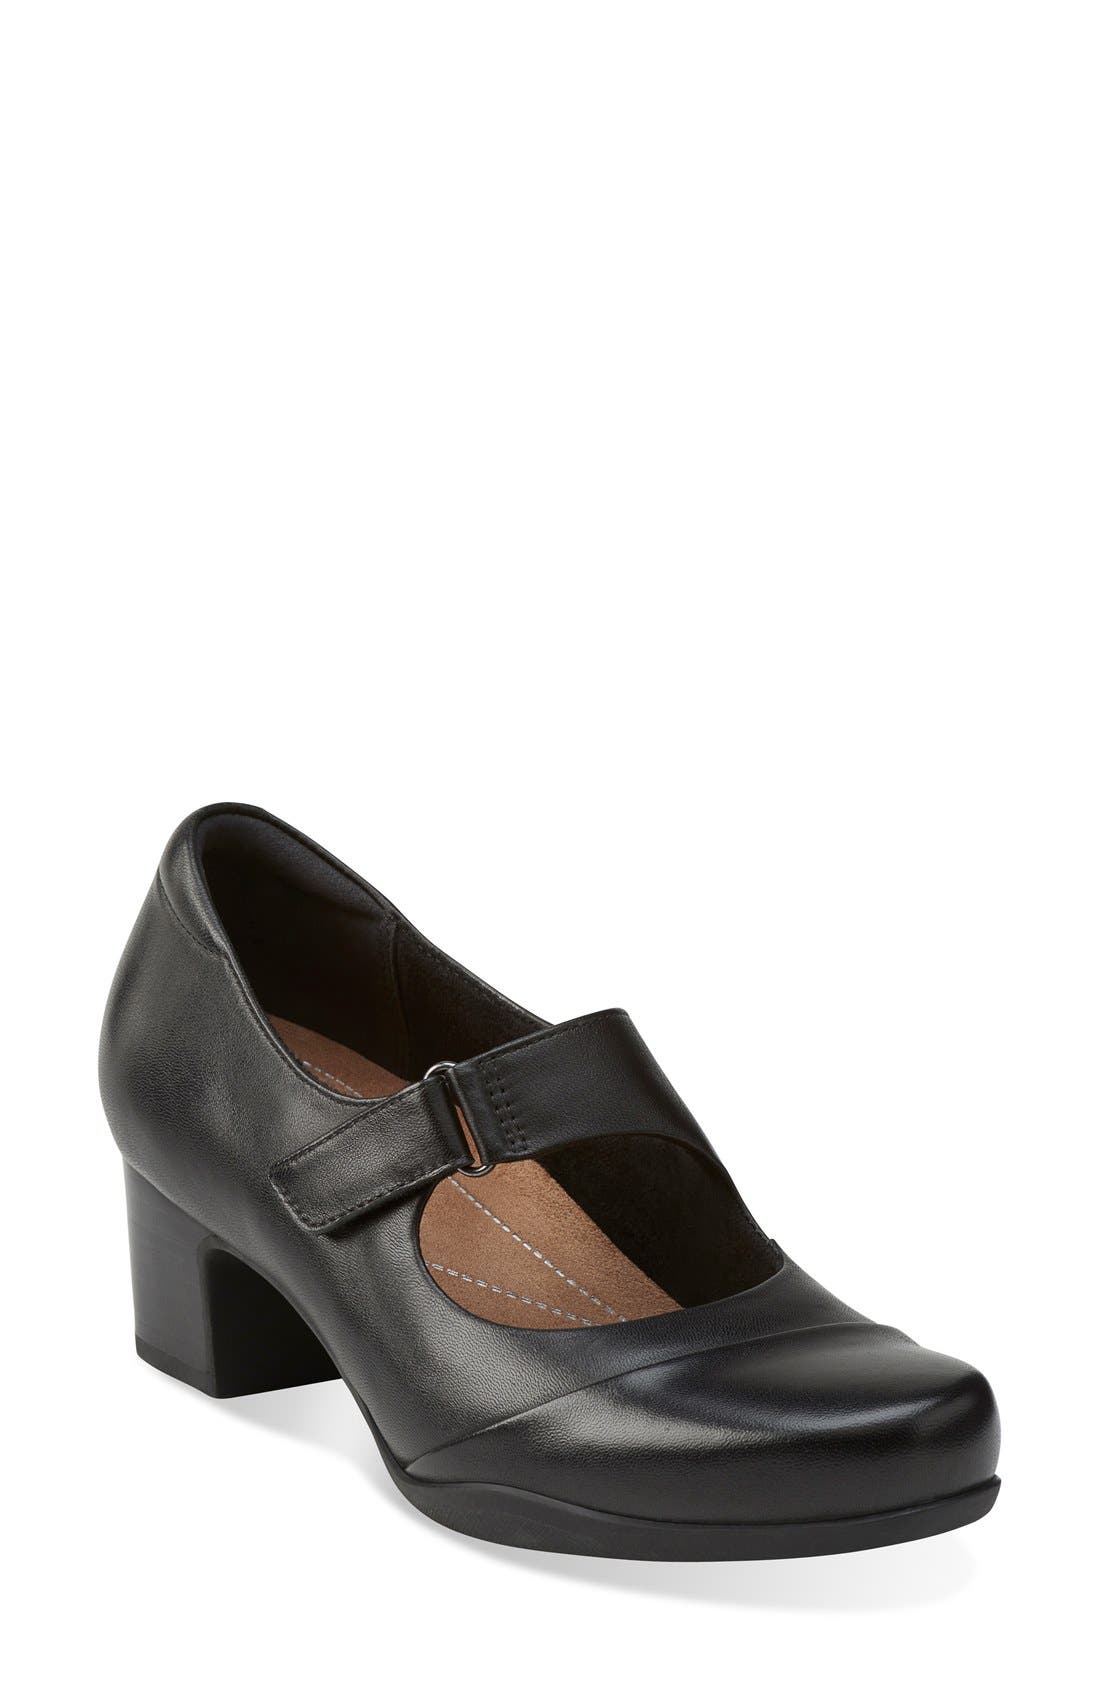 clarks brown mary jane shoes